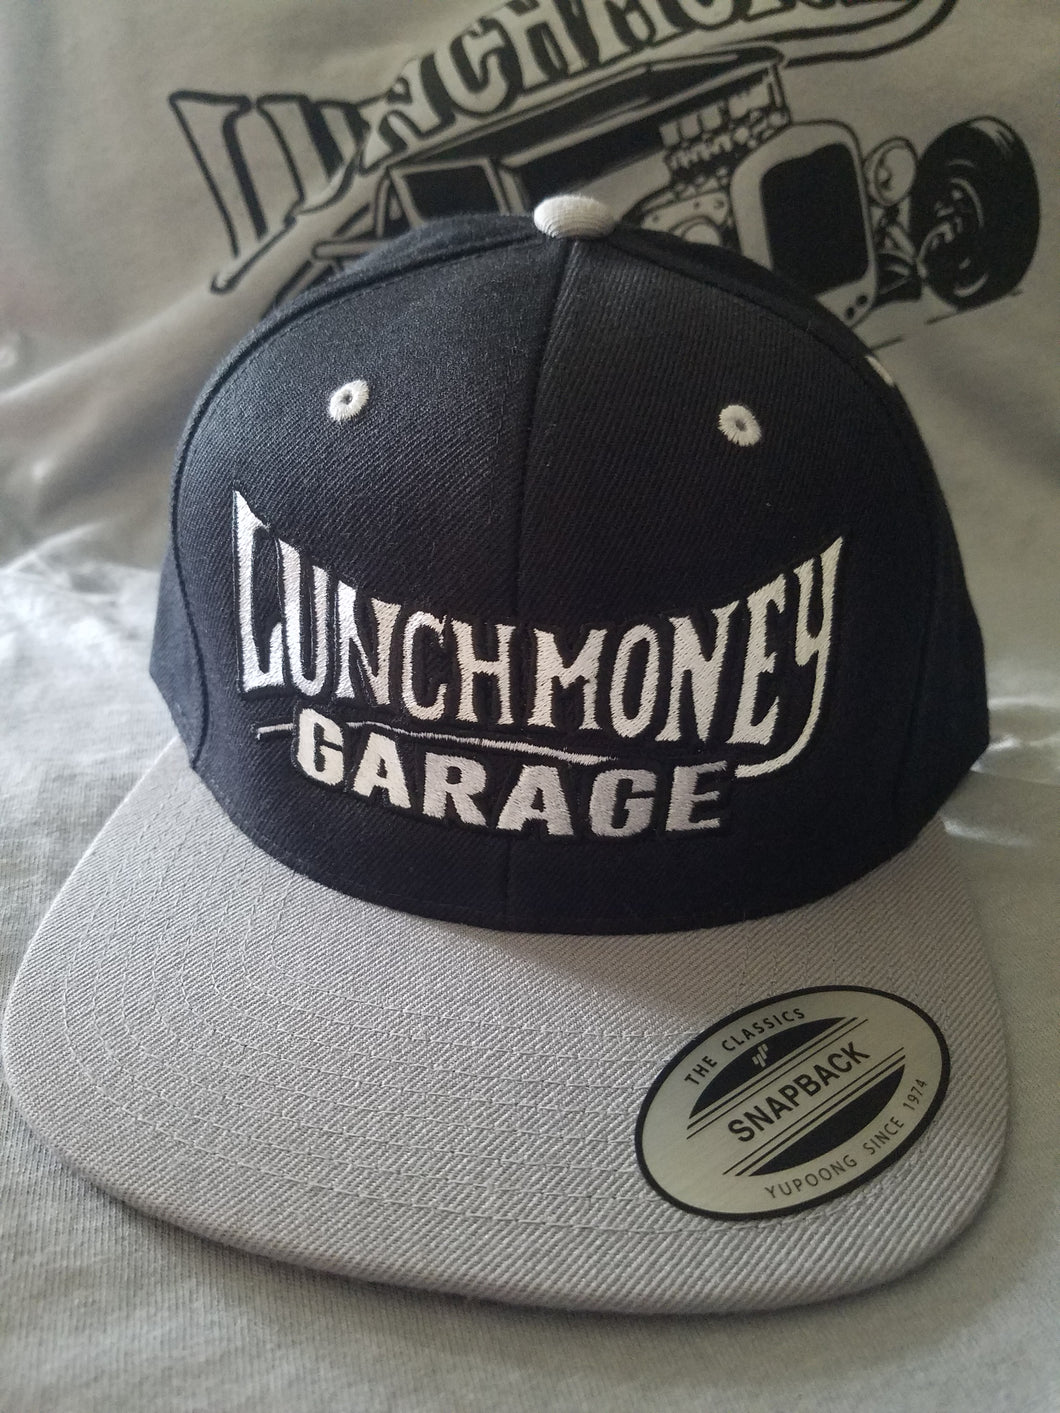 Black and Grey Lunch Money hat